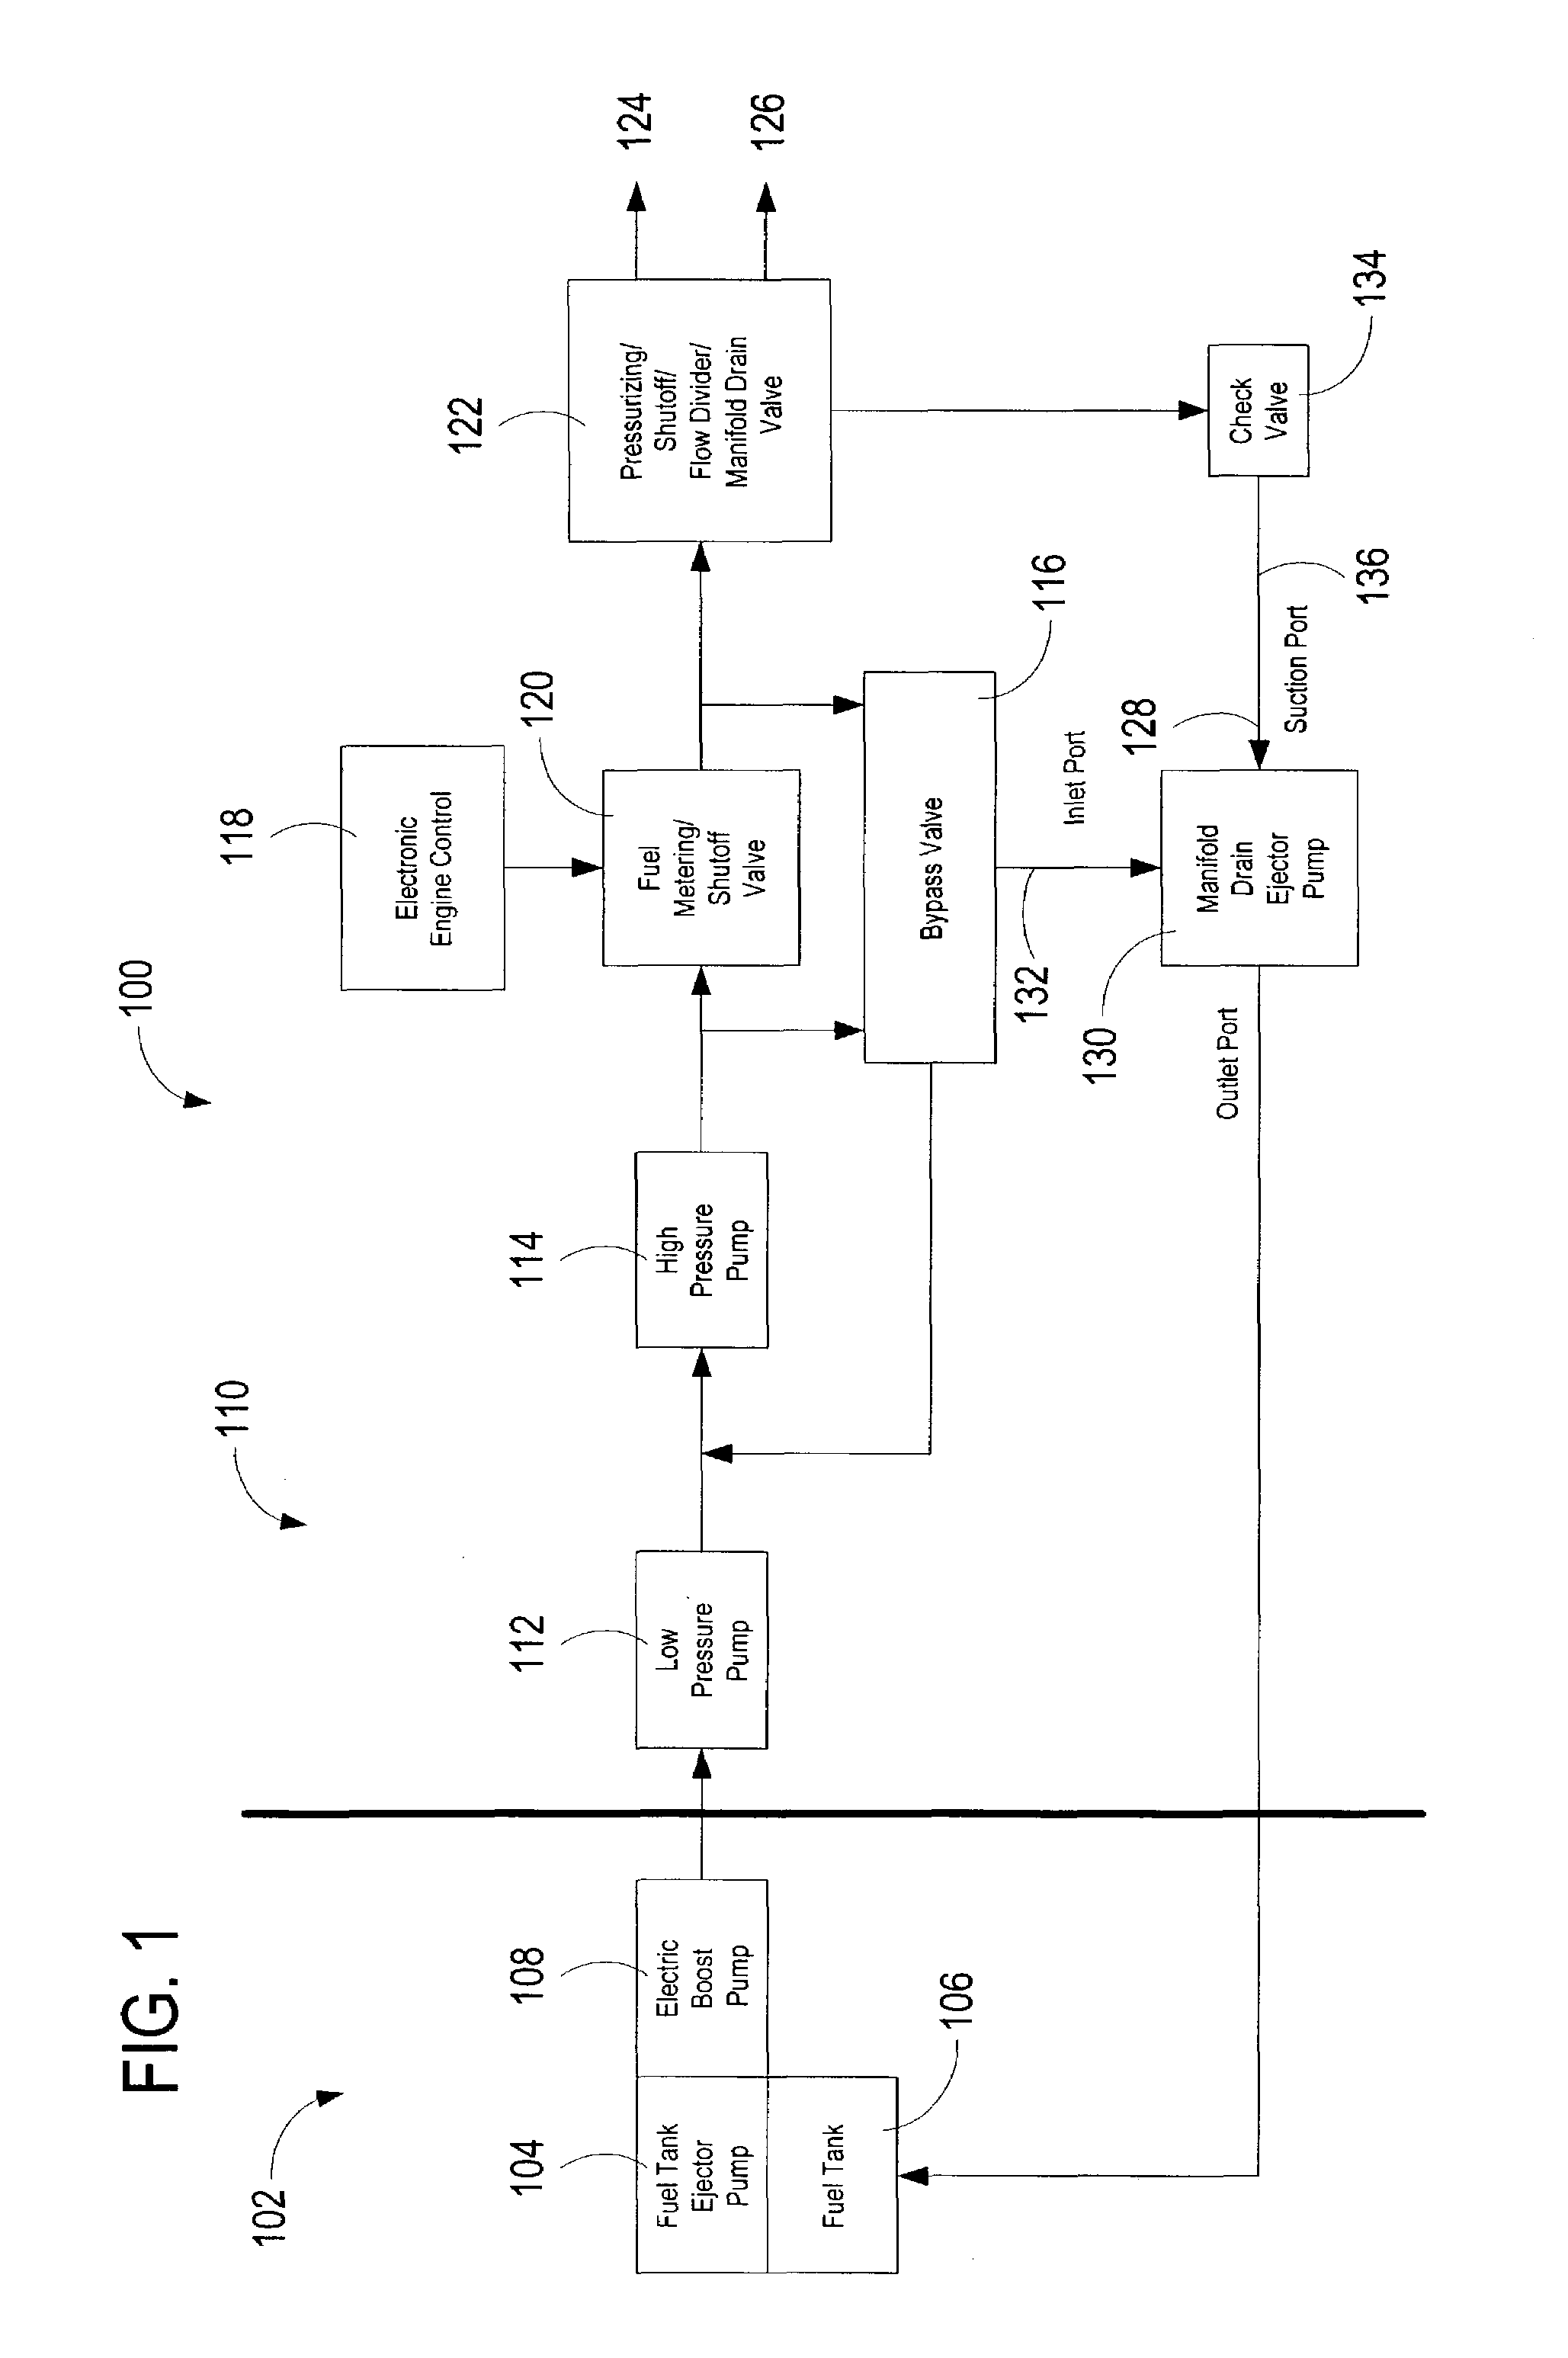 Fuel system for a gas turbine engine